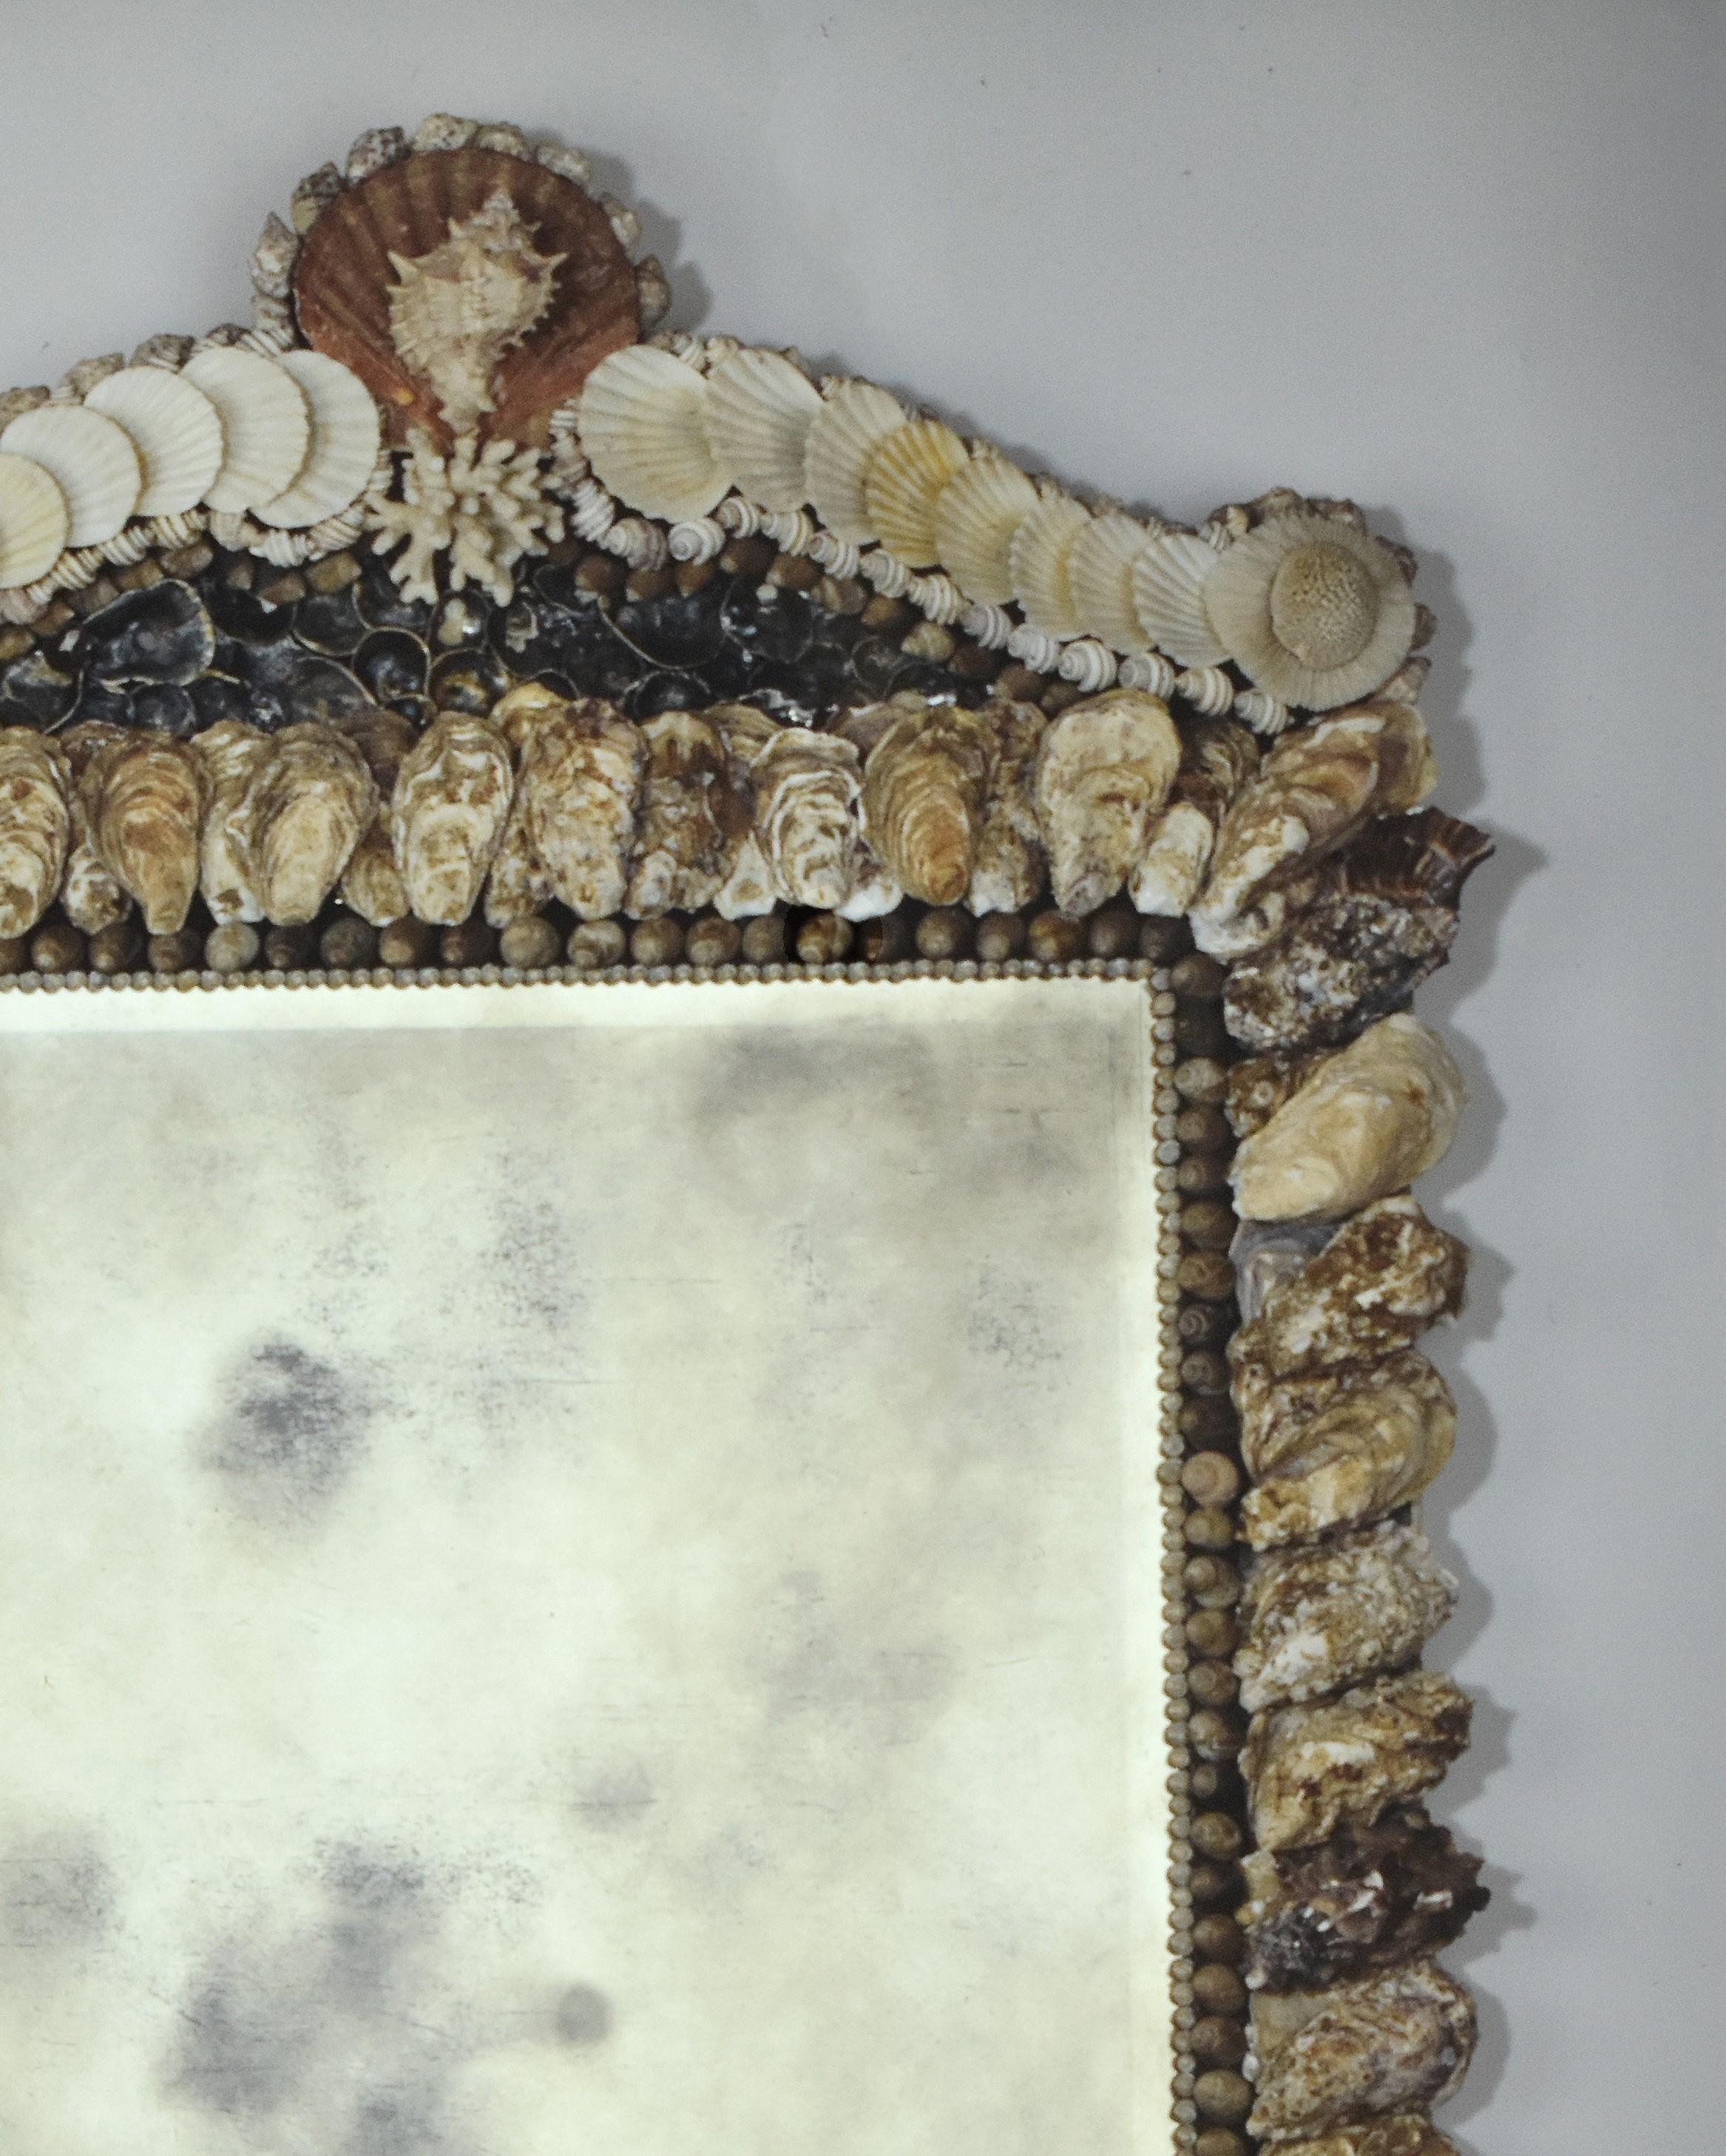 A fine rectangular mirror encrusted with native winkle and oyster shells. The pediment with scallop shell finial surmounted by a single murex shell and flanked by broken scrolls of white fan and mother-of-pearl troca shells. A giant black South